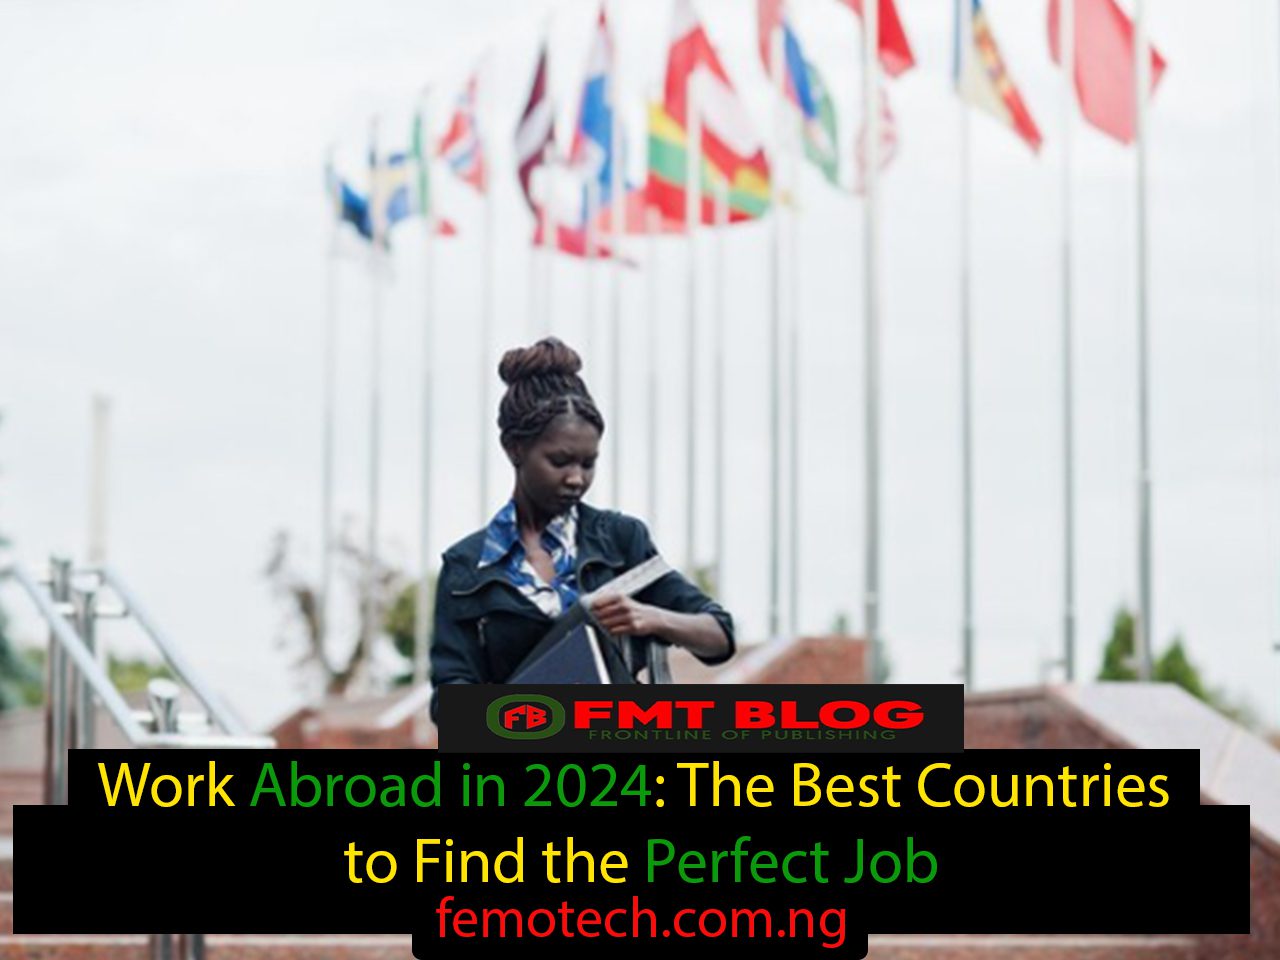 Work Abroad in 2024: The Best Countries to Find the Perfect Job